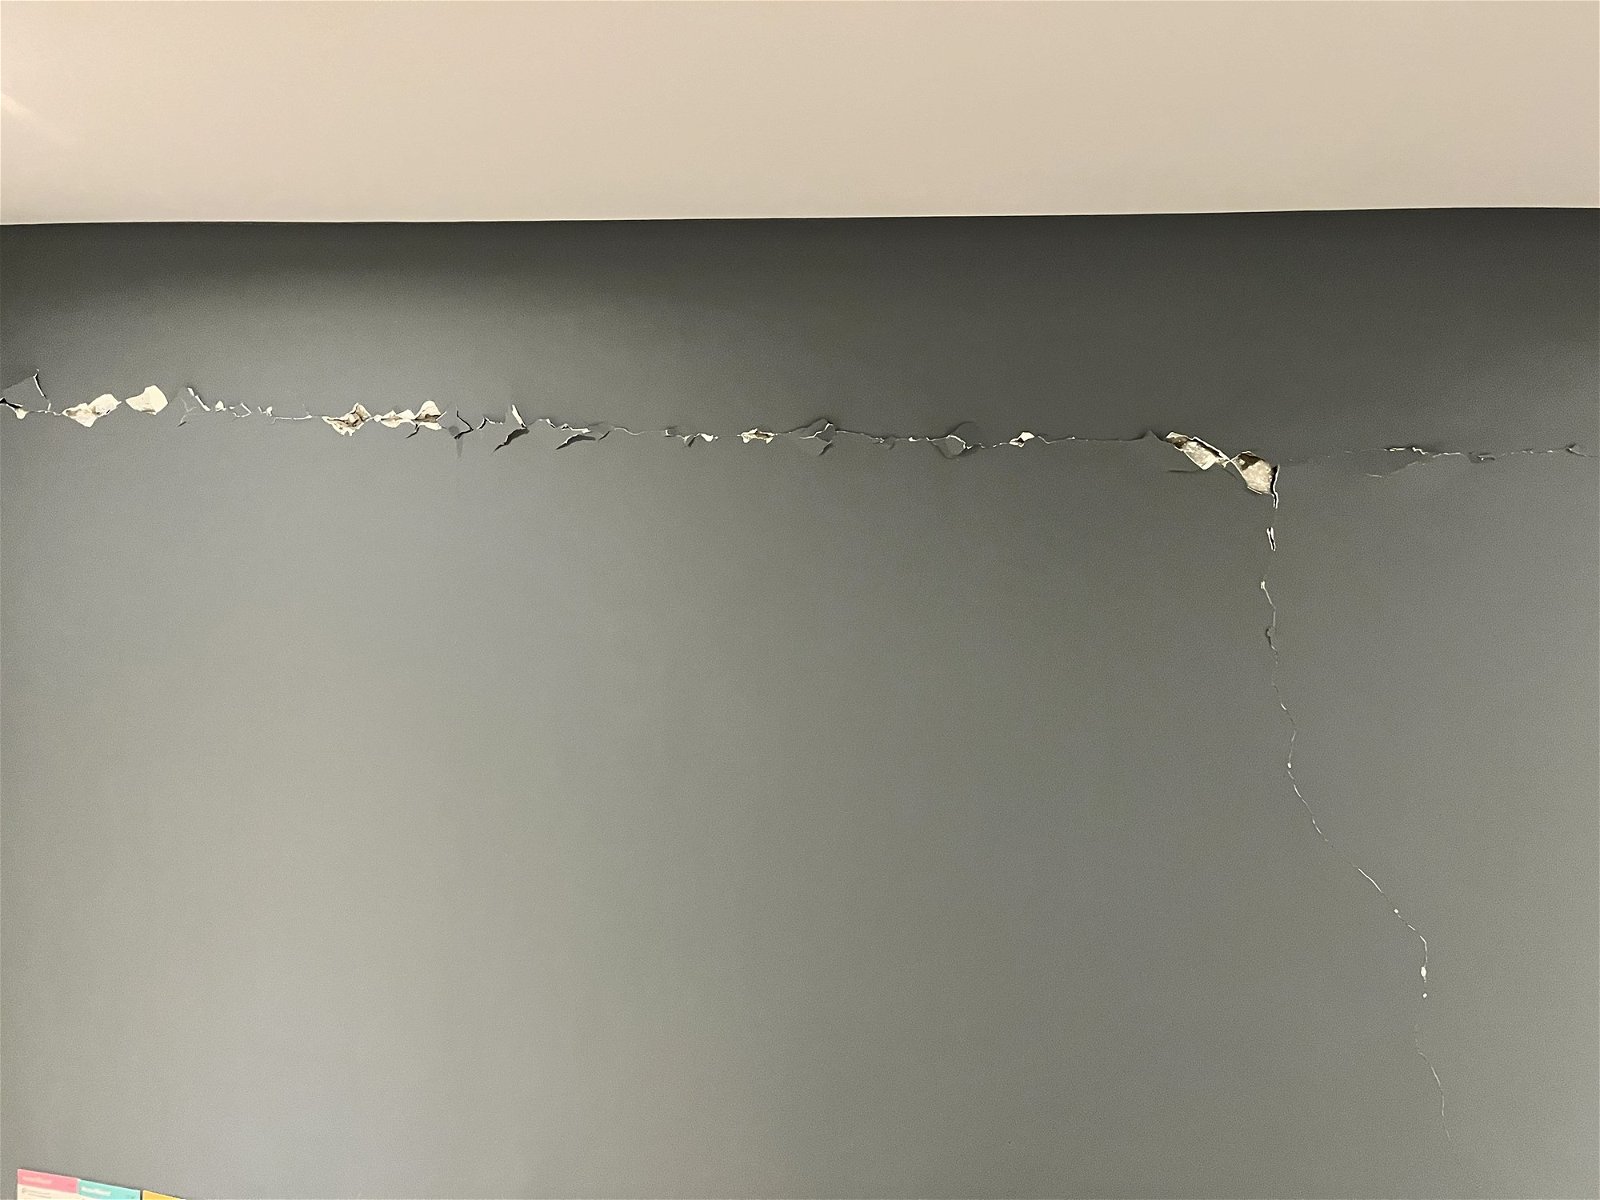 A large crack in a grey wall.